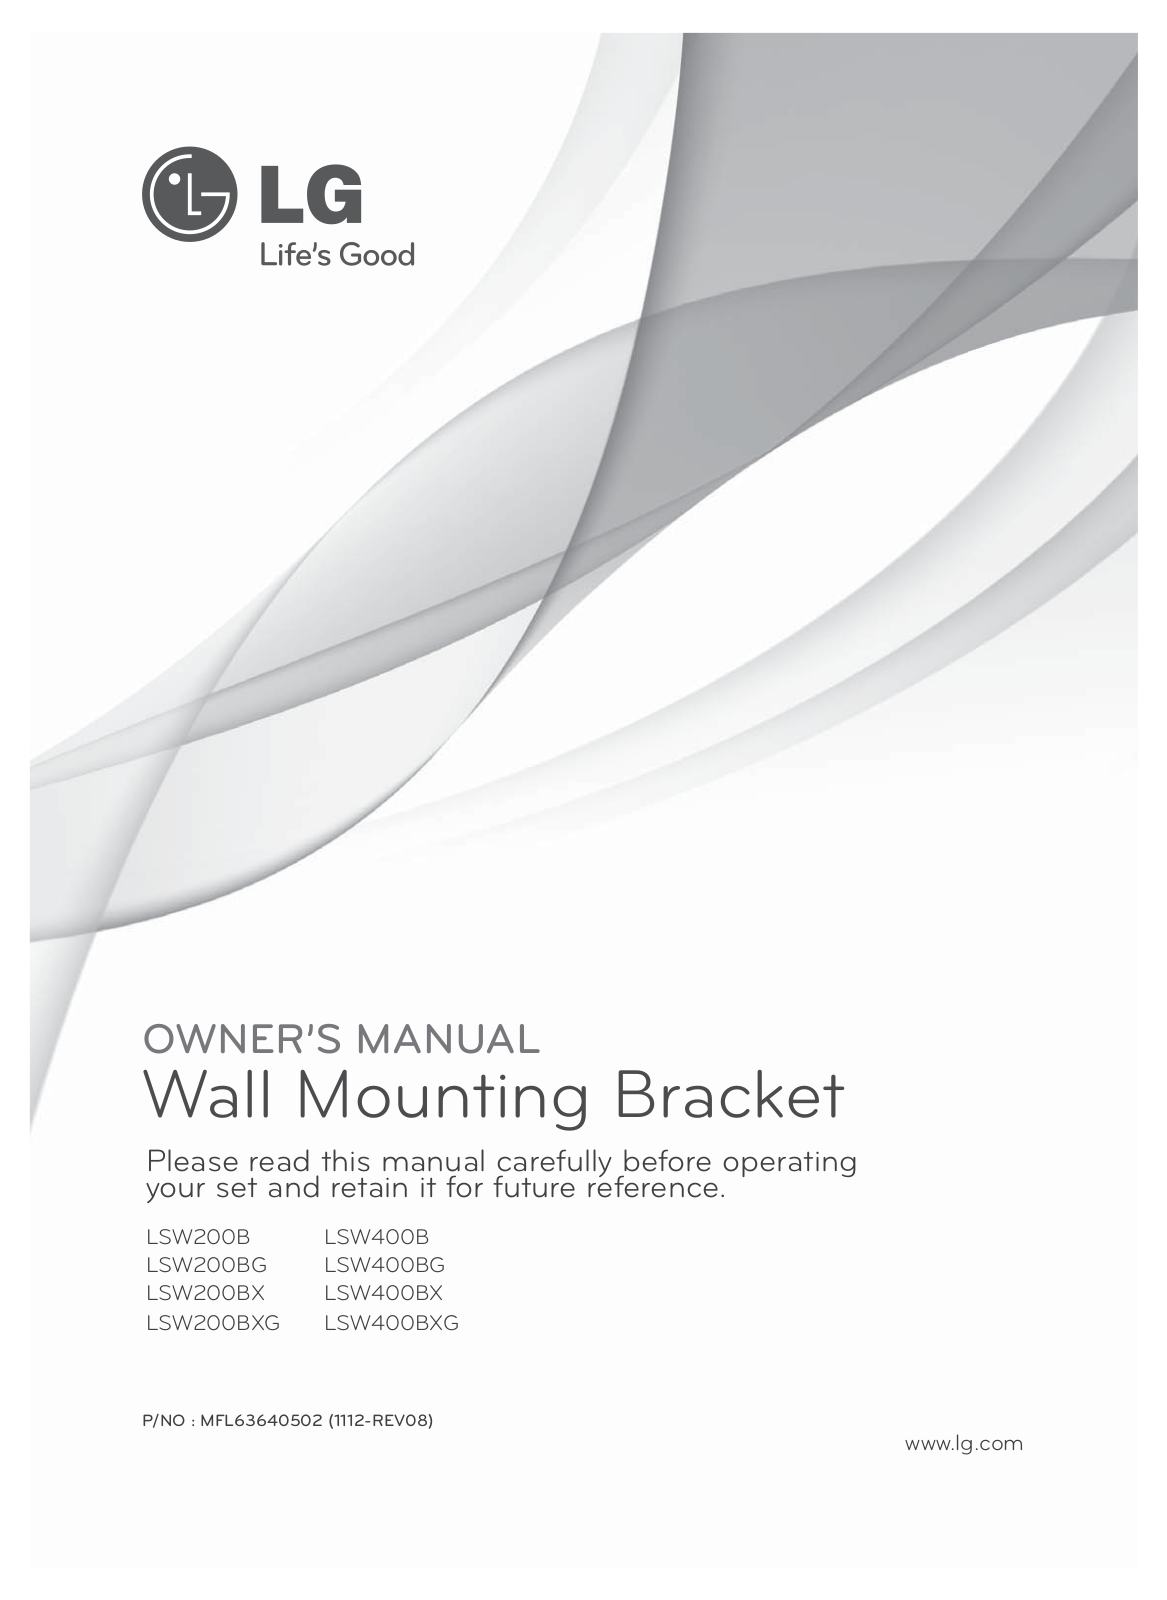 LG LSW400BX, LSW400BXG Owner’s Manual